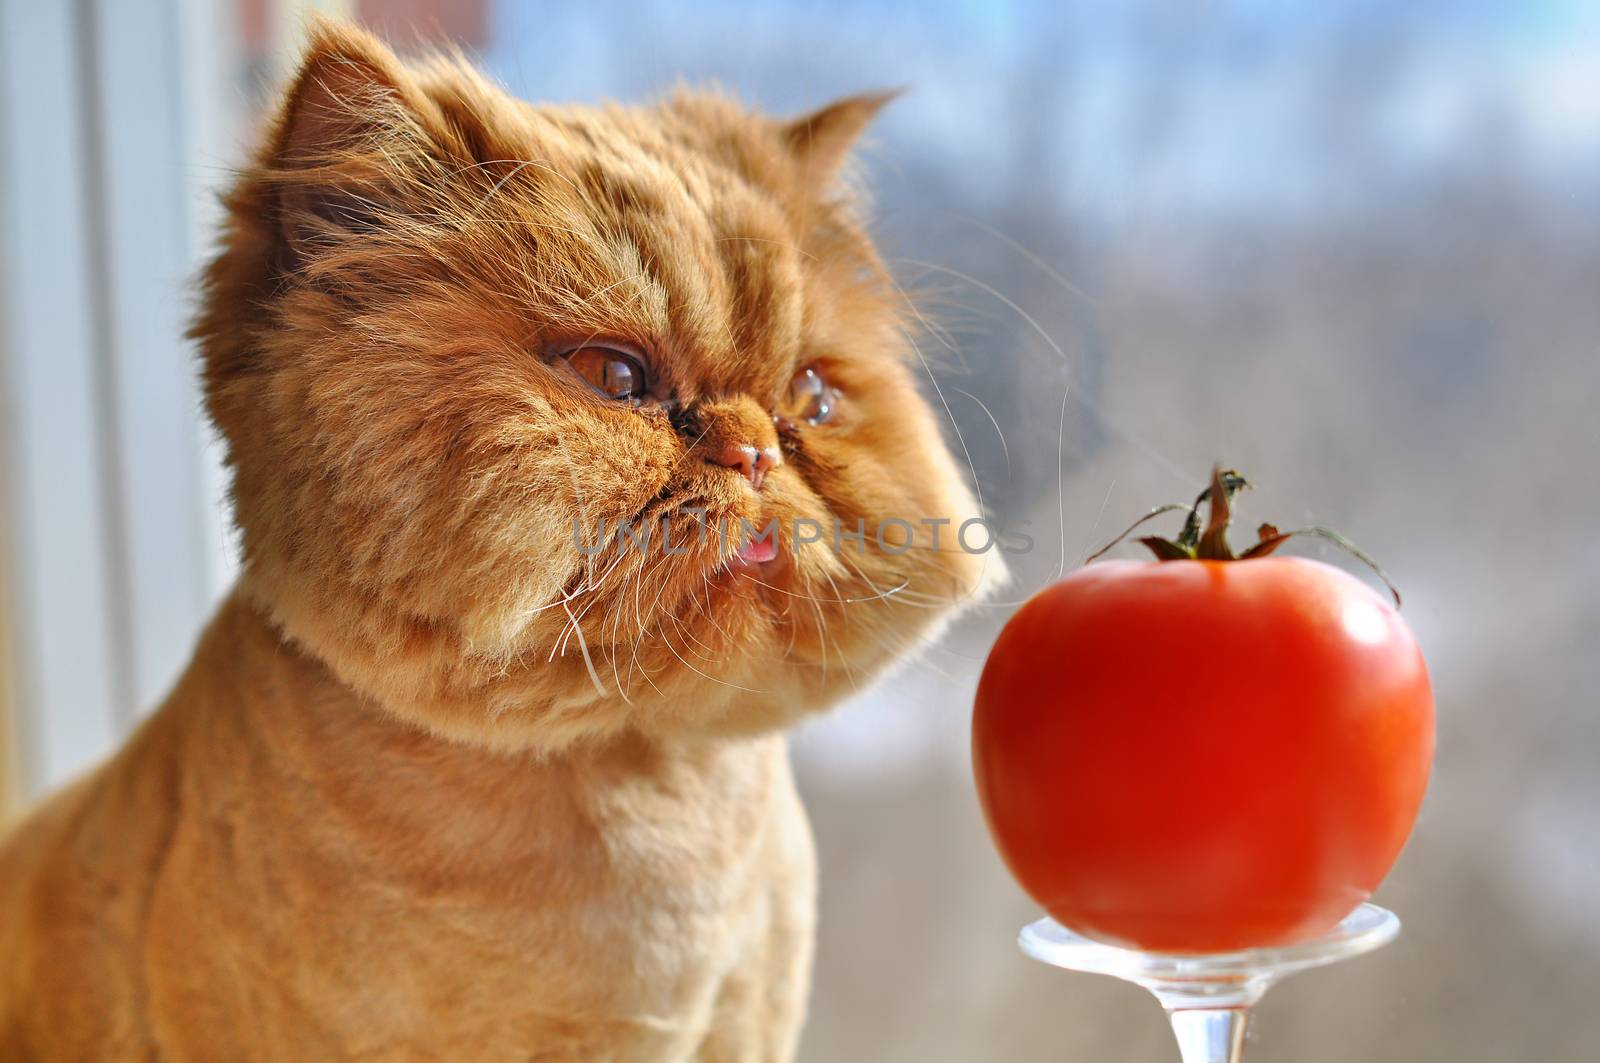 Grooming funny red persian cat with red tomato is sitting on a windowsill and looking out the window